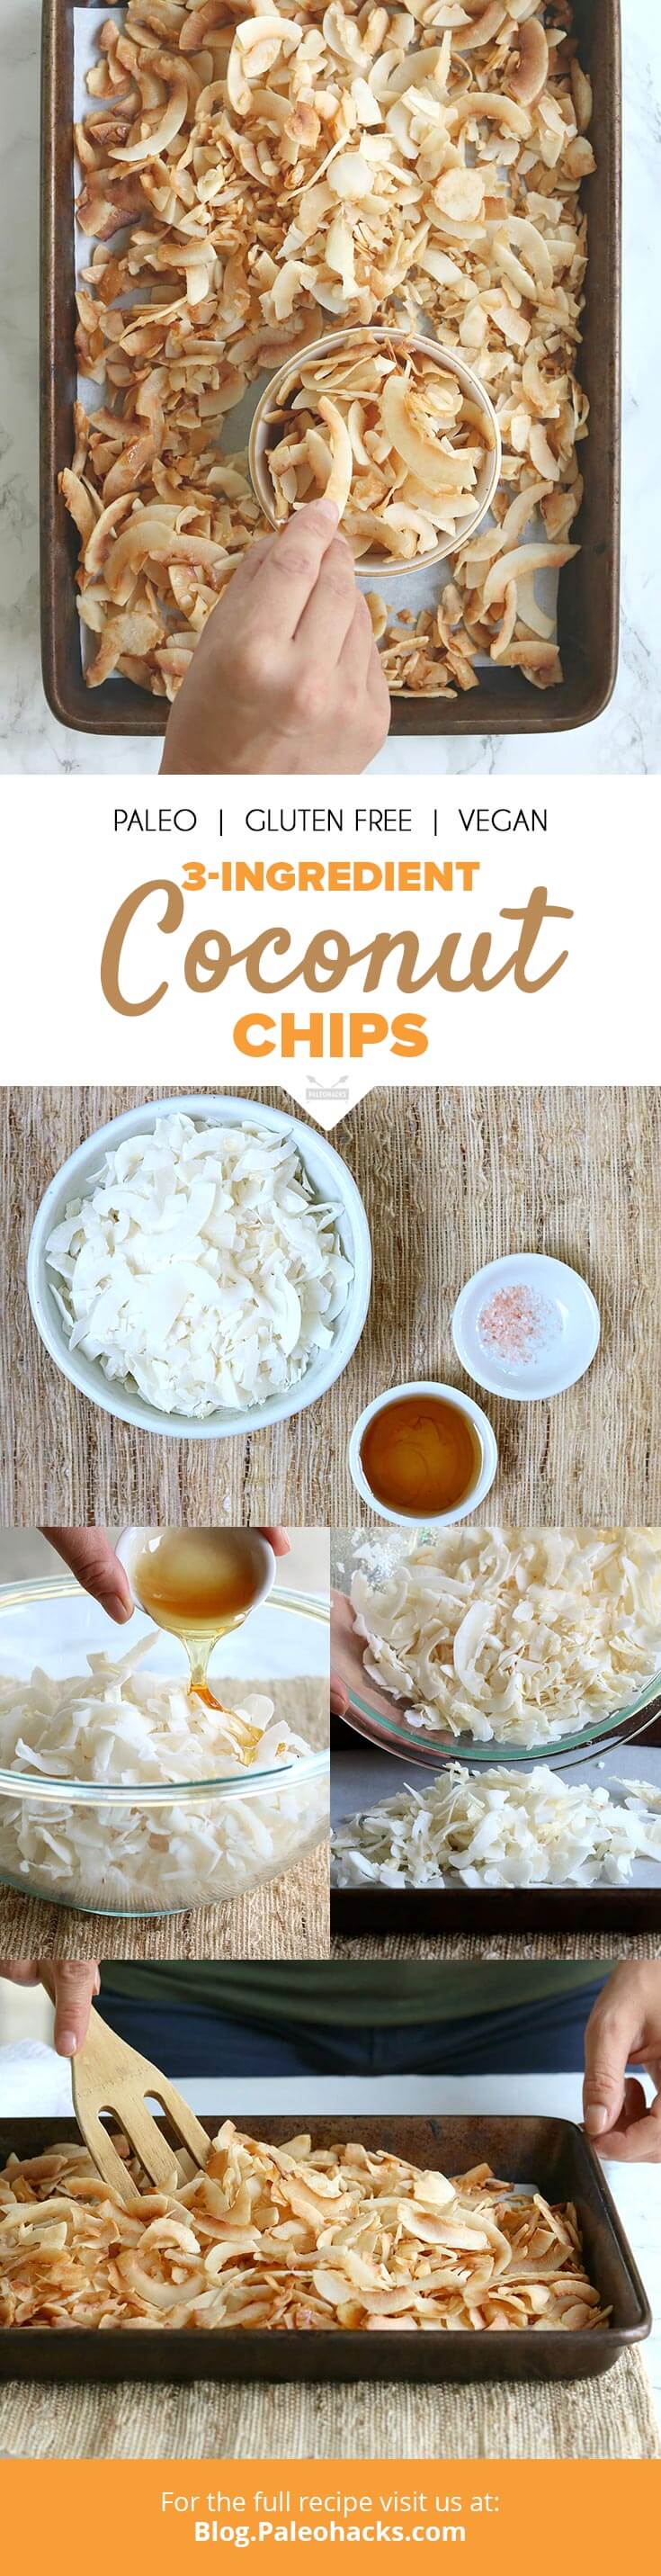 These coconut chips tossed in maple syrup and sea salt are the perfect sweet-n-salty snack. You’re going to wonder where they've been all your life!